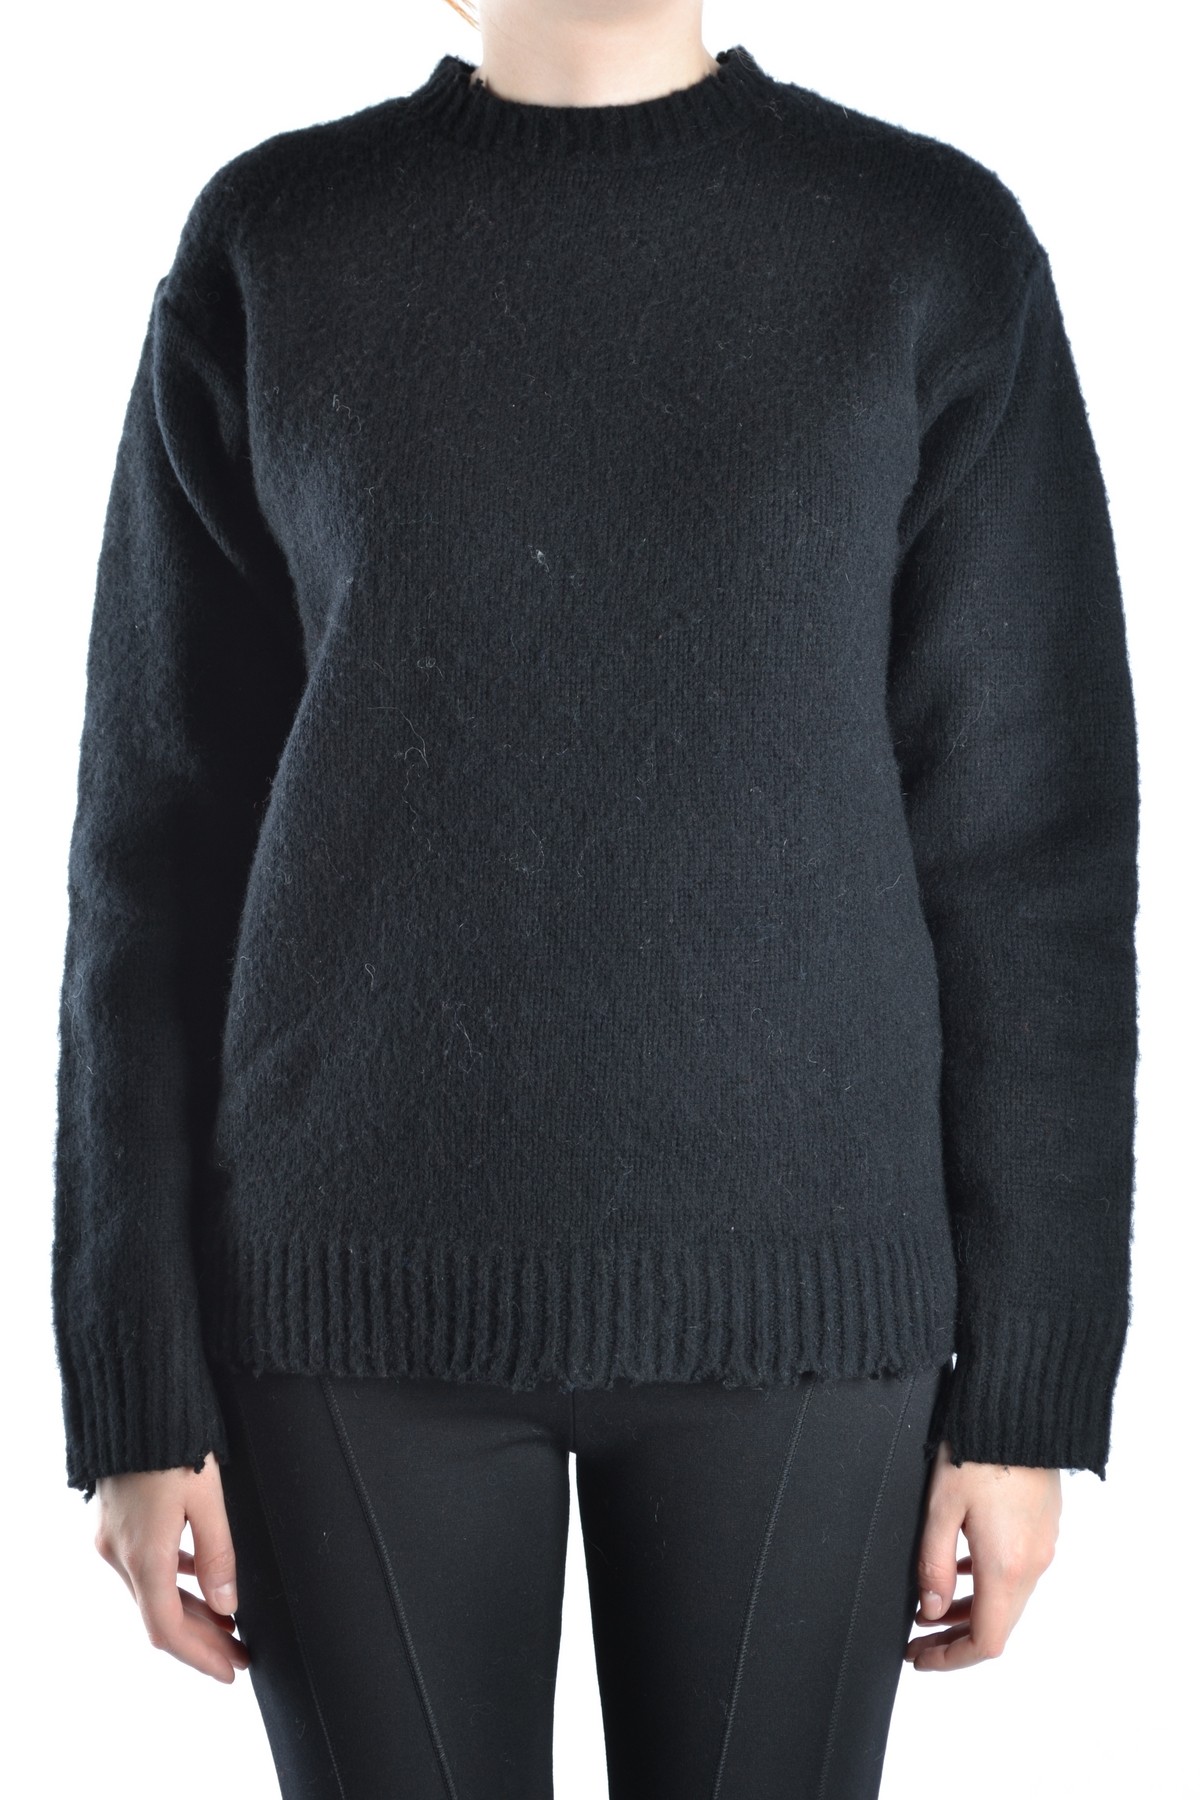 Alexander Wang Sweaters and Cardigans | luxlet.com